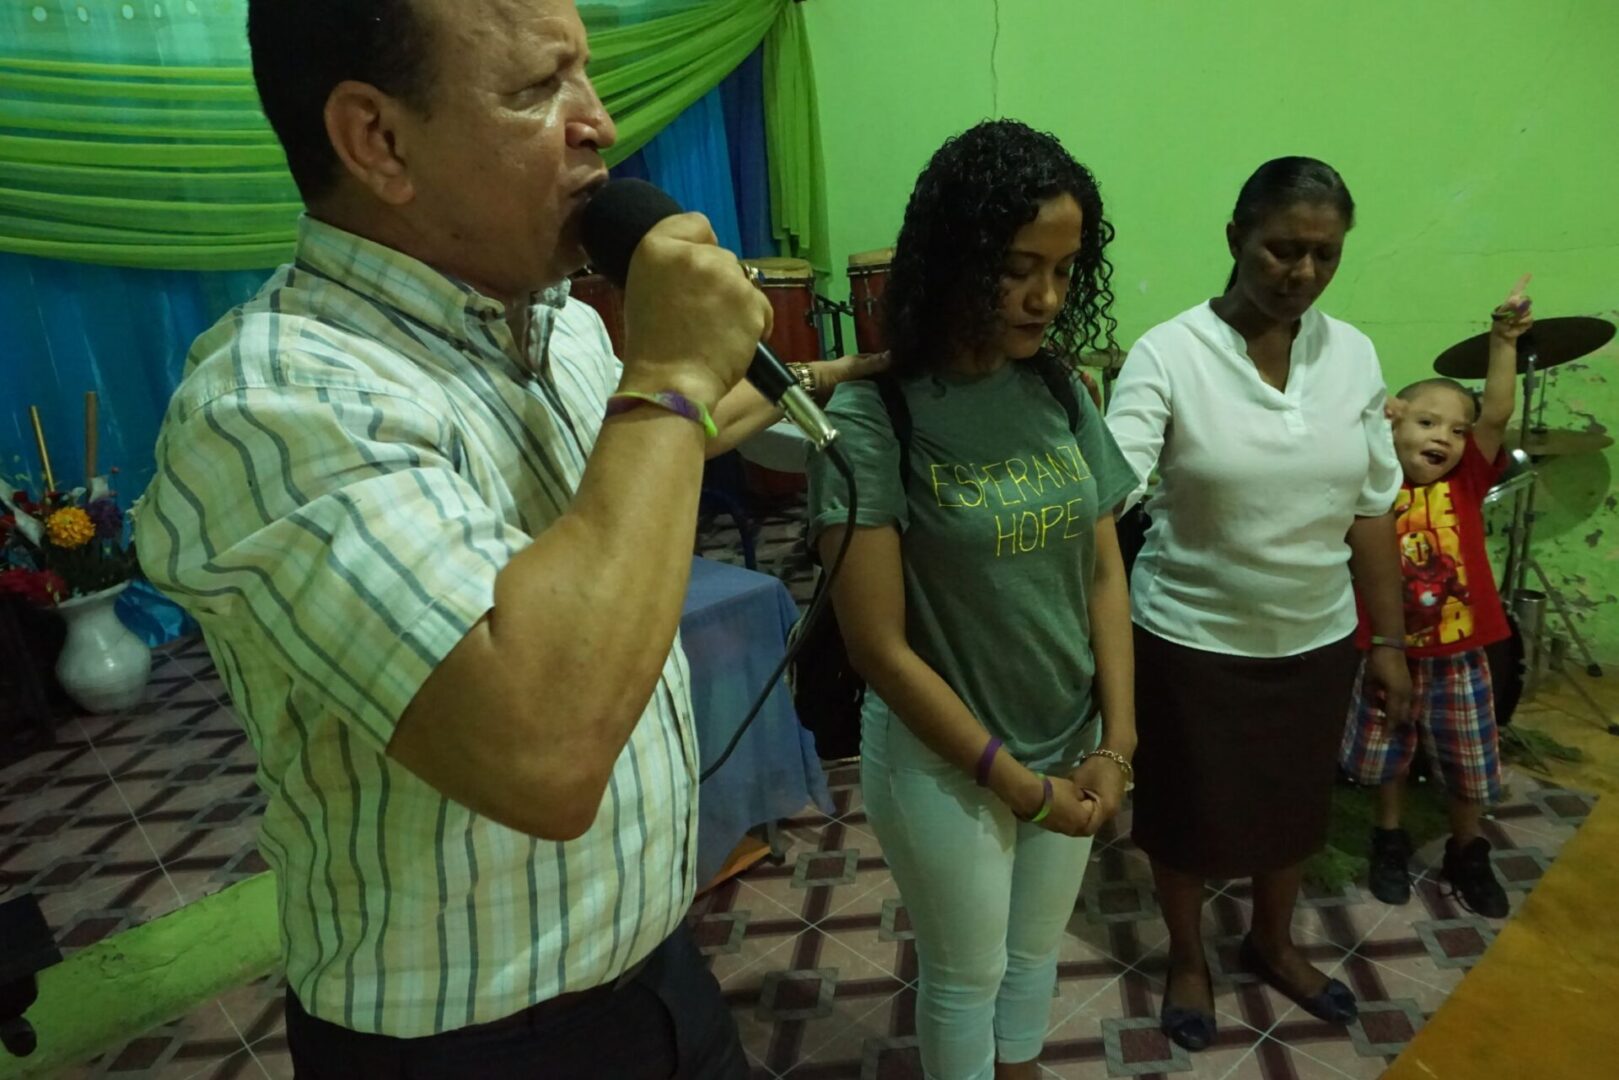 A man speaking into a mic and two women, all of them with their eyes closed; a child with his hands up